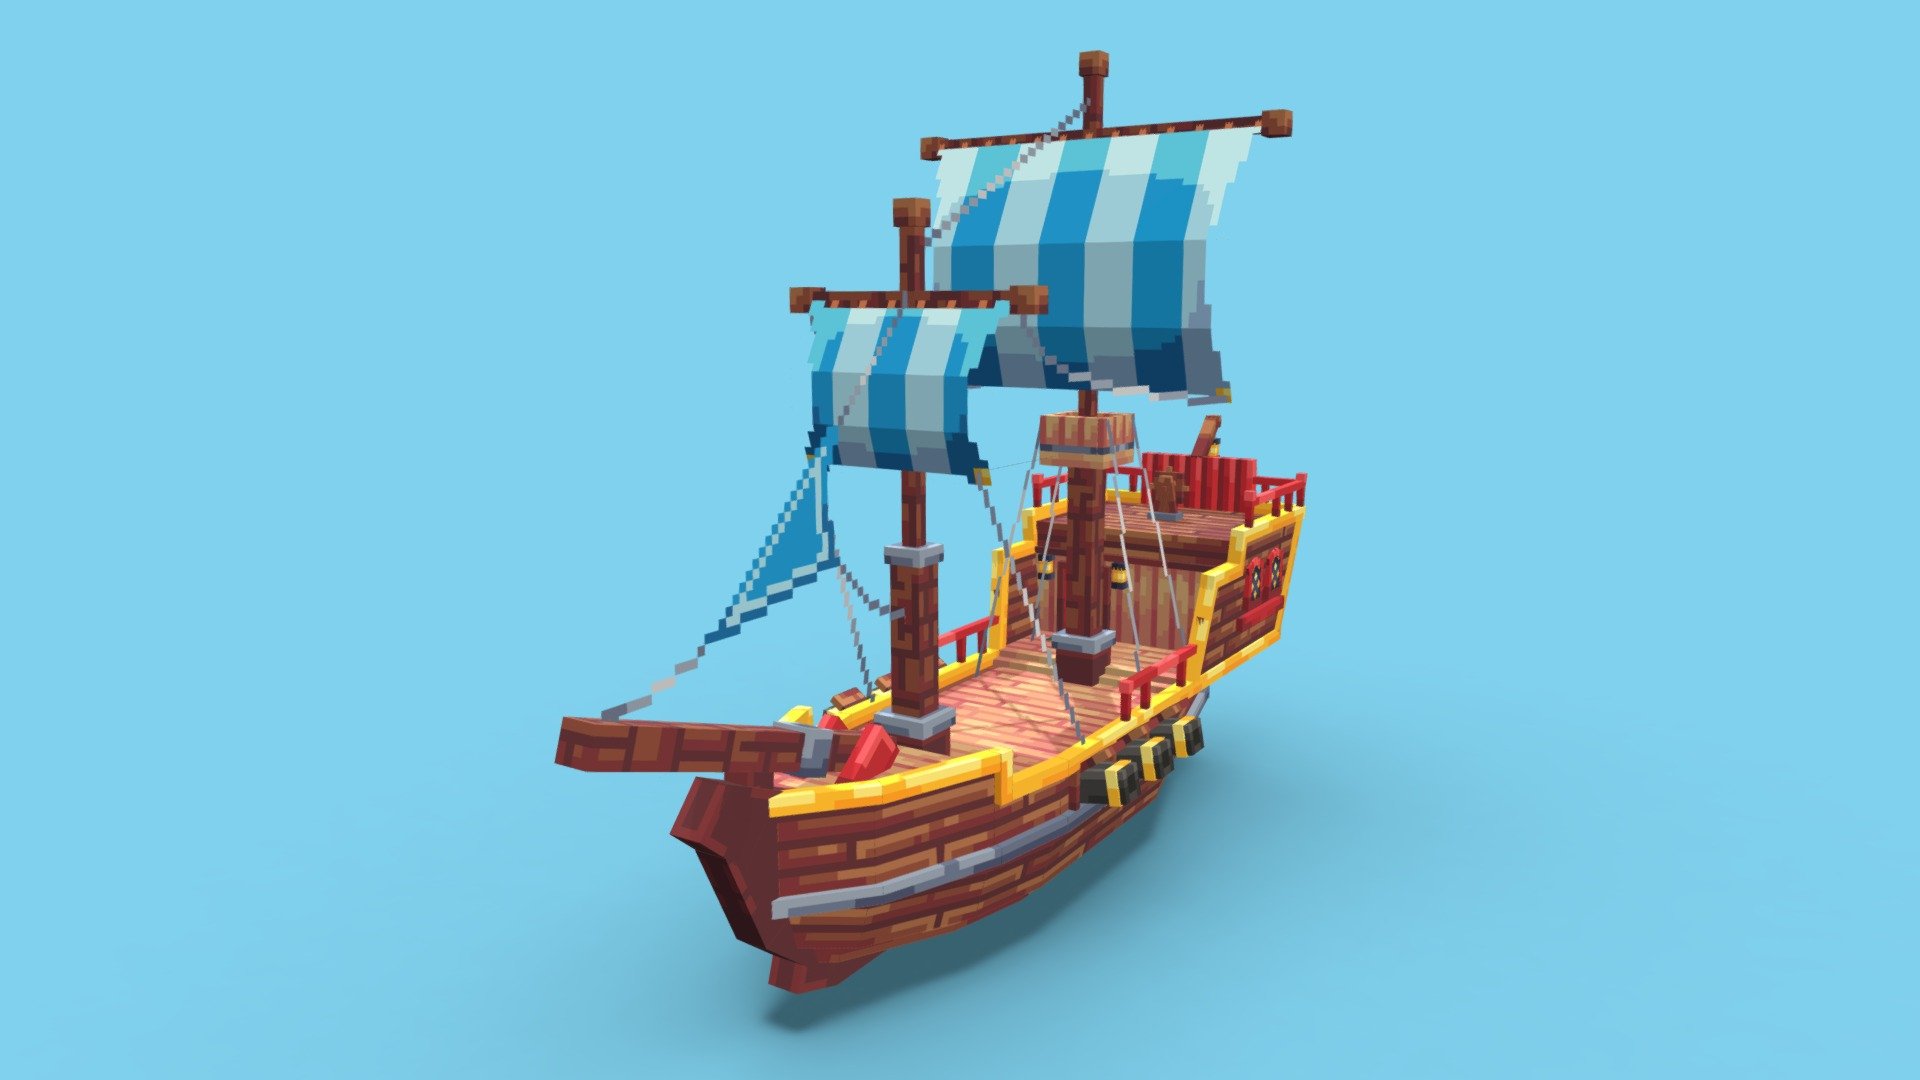 About the Project

A low poly, pixel art sailing ship
Made with Blockbench
Personal project


About Me

Hi! I'm Cryo, a 3D modeller who uses Blockbench to create low-poly 3D models for Minecraft.
Email: Cryogenesis3D@gmail.com
Discord: Cryo#1238
 - Sailing Ship - 3D model by Cryogenesis3D 3d model